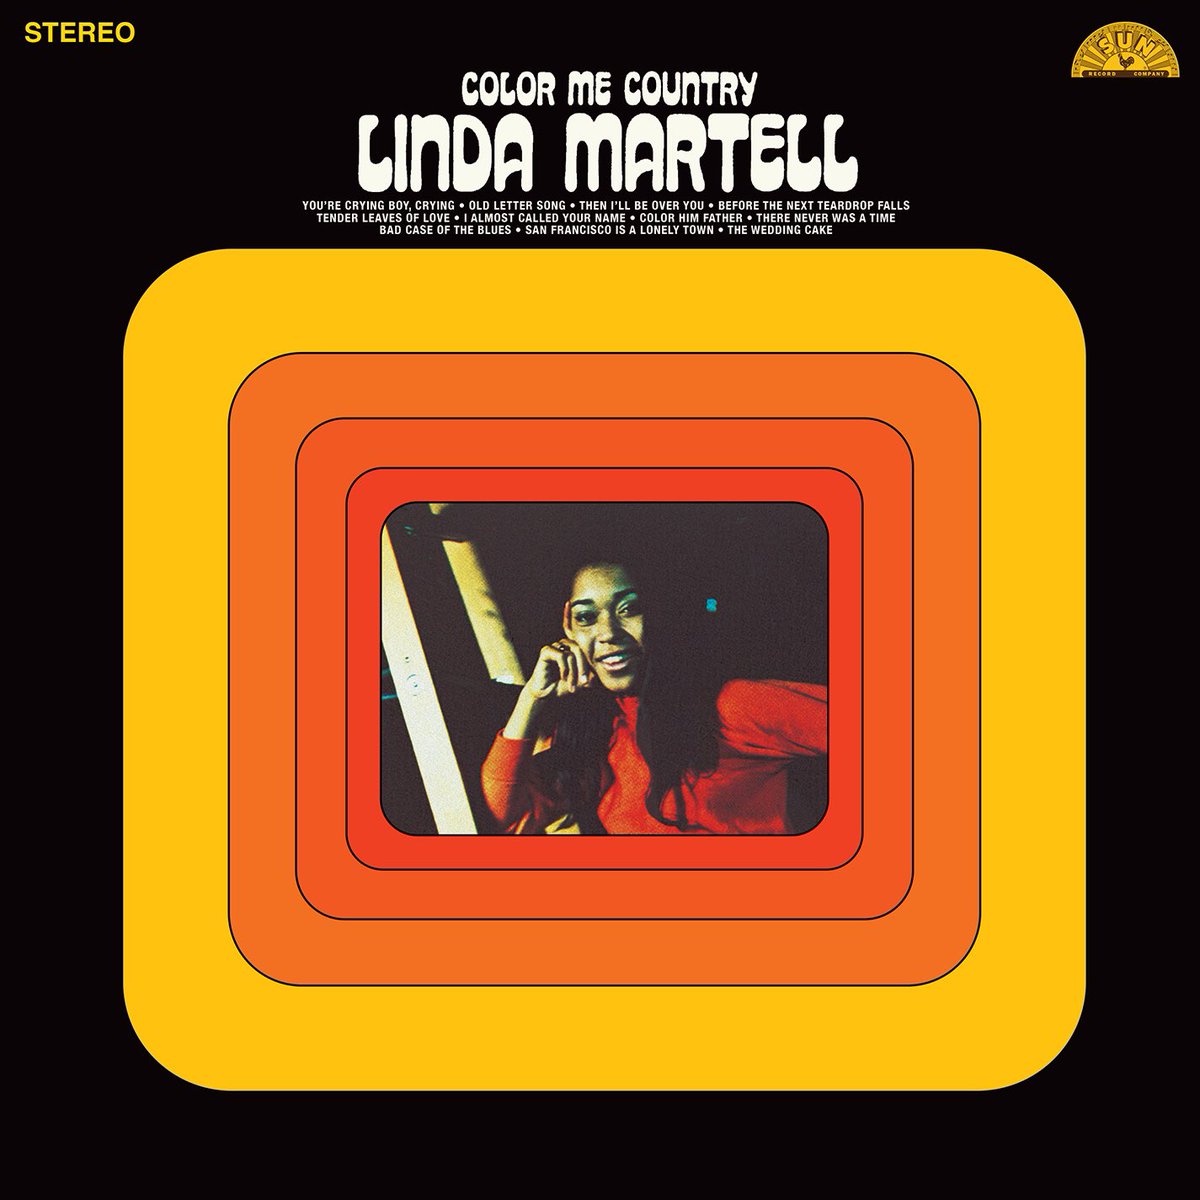 Linda Martell's 'Color Me Country' is now newly available on CD as well as vinyl and streaming. 🎶 Take a listen and let us know your favorite song! Available here: amzn.to/4bk3pSw